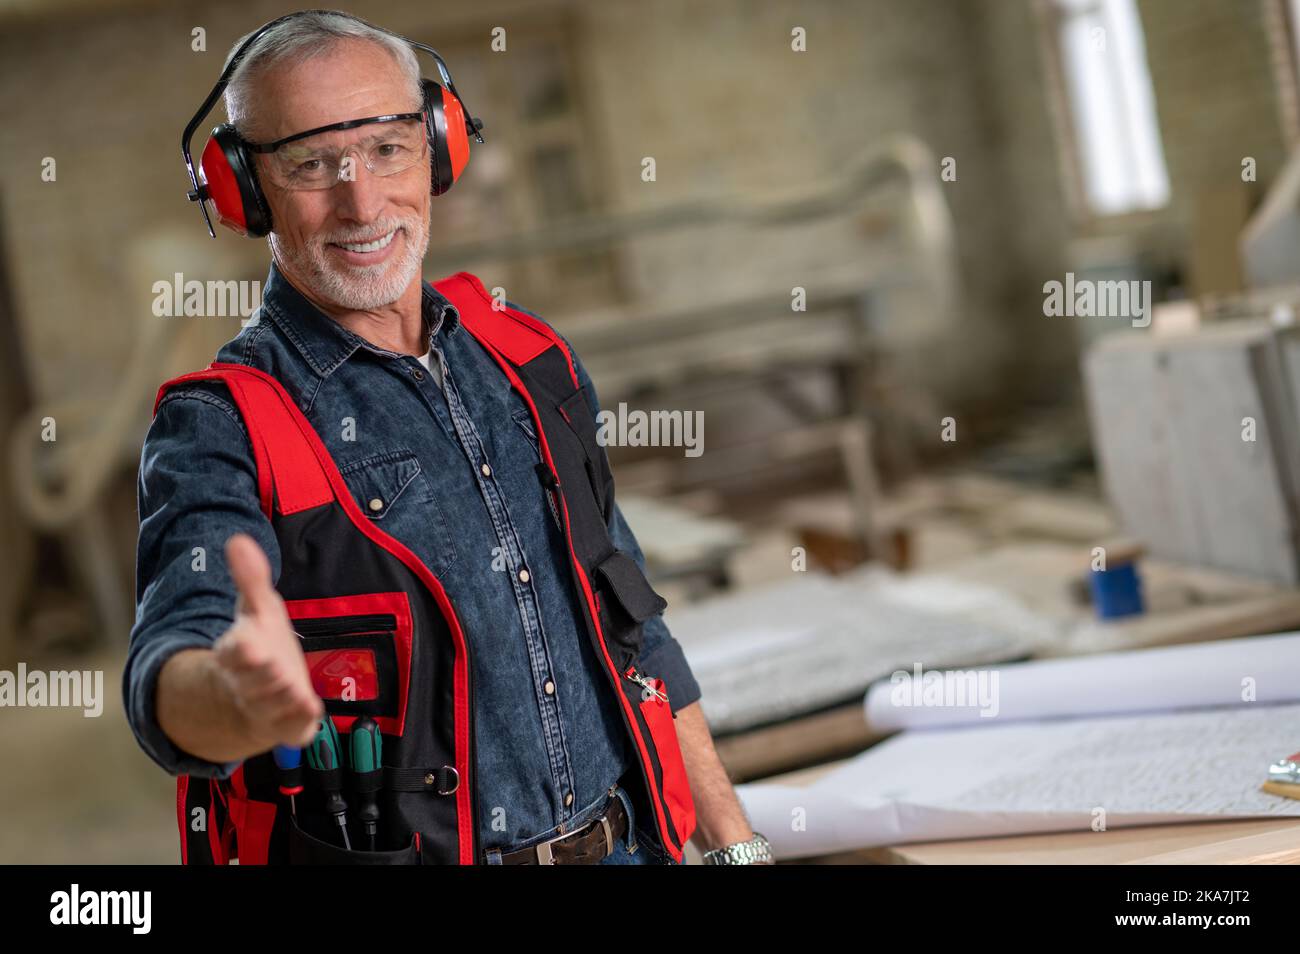 Smiling craft person stretching and greeting someone Stock Photo